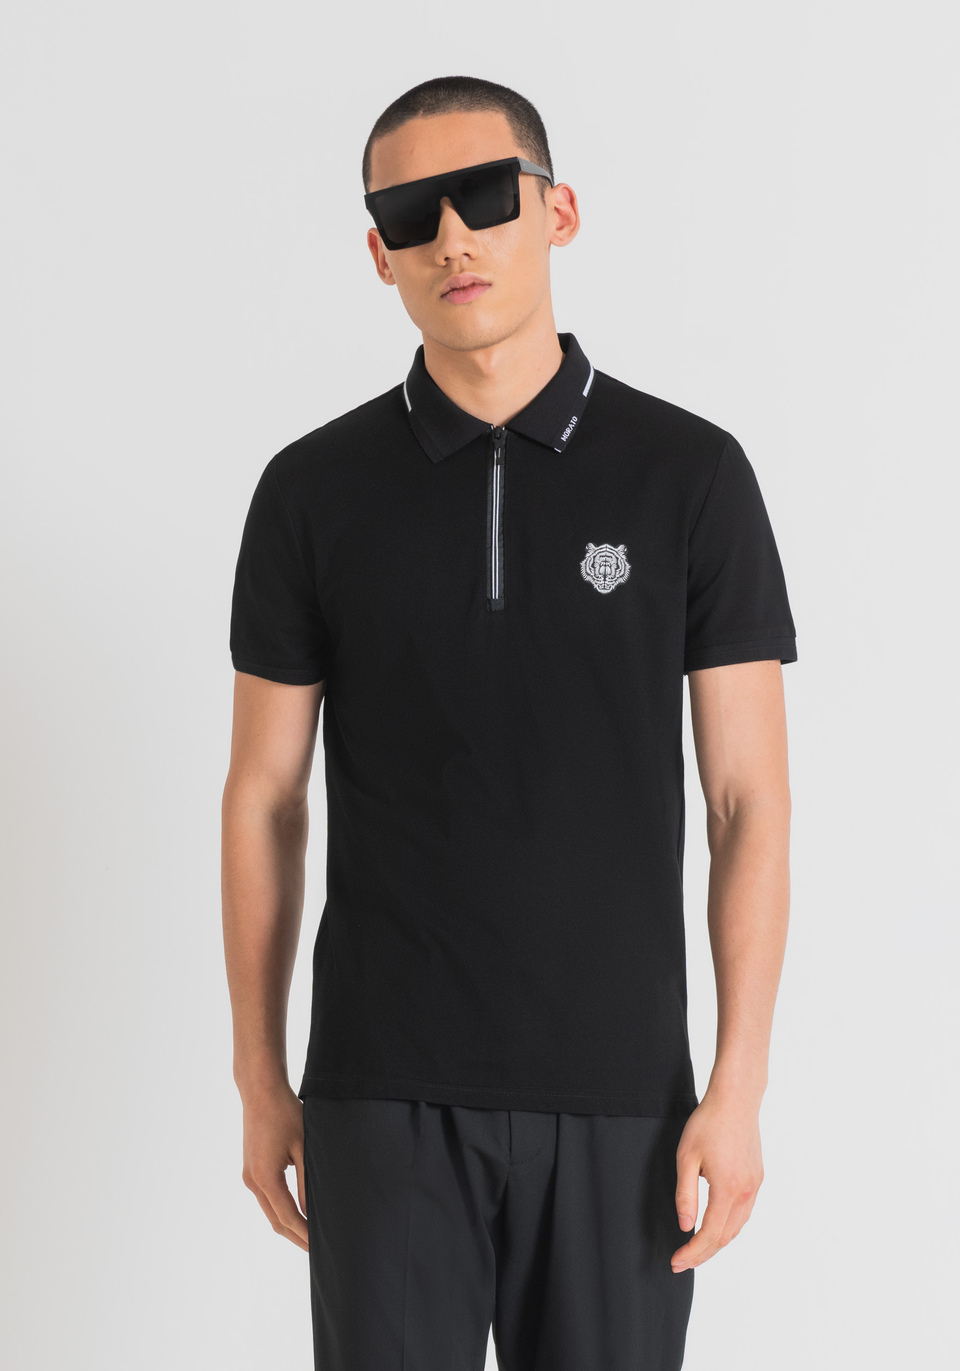 SLIM FIT POLO SHIRT IN MERCERISED COTTON PIQUE WITH RUBBERISED TIGER PRINT - Antony Morato Online Shop